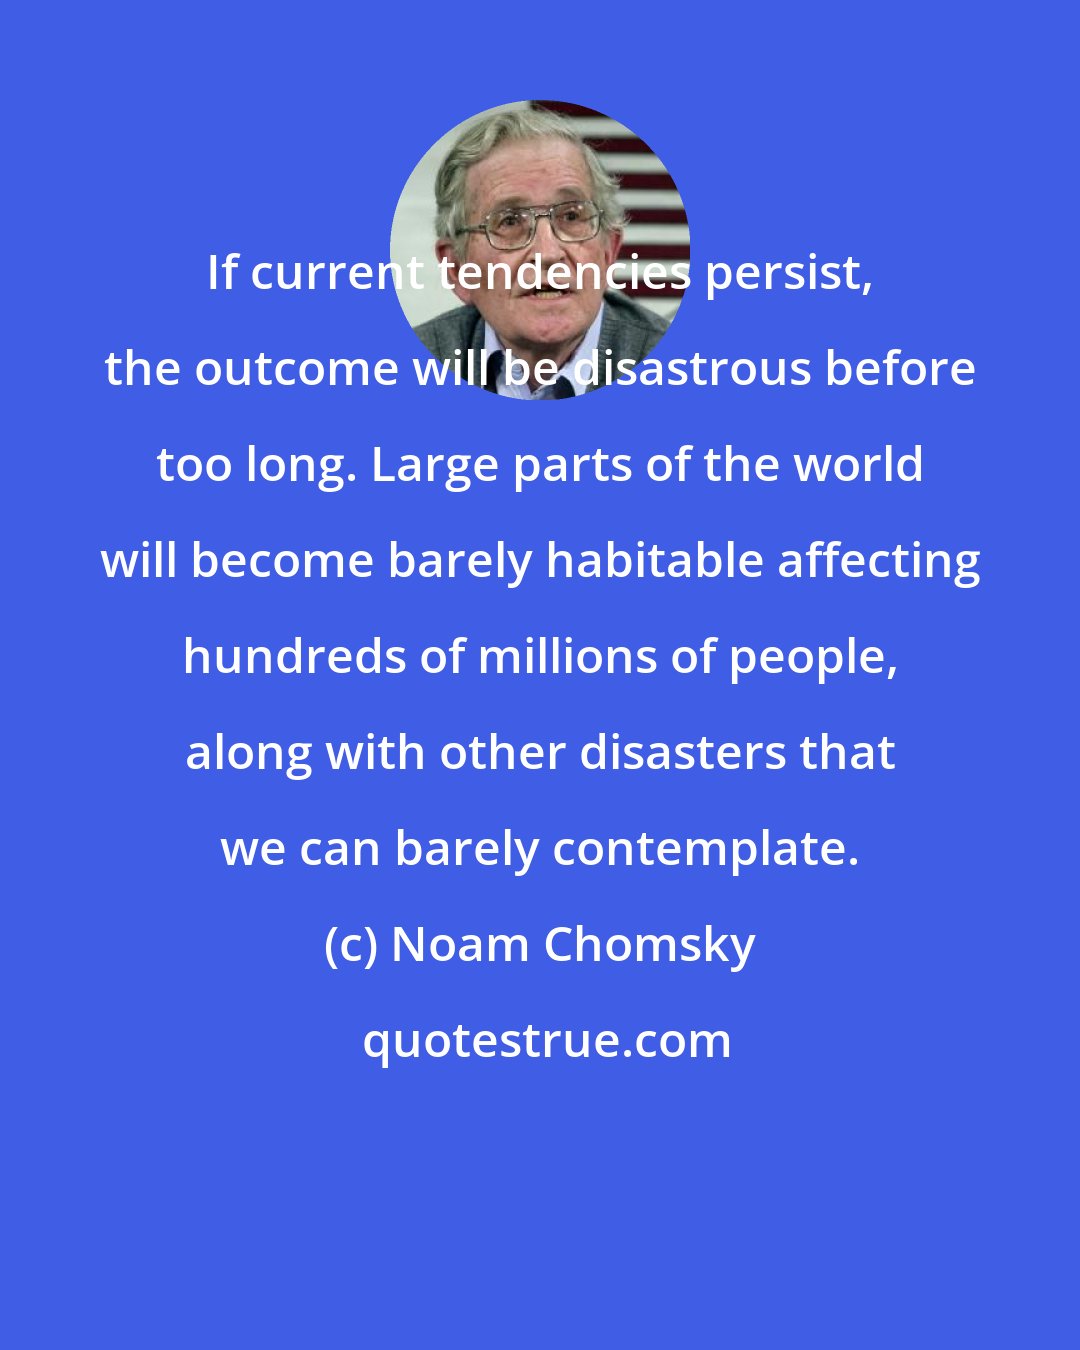 Noam Chomsky: If current tendencies persist, the outcome will be disastrous before too long. Large parts of the world will become barely habitable affecting hundreds of millions of people, along with other disasters that we can barely contemplate.